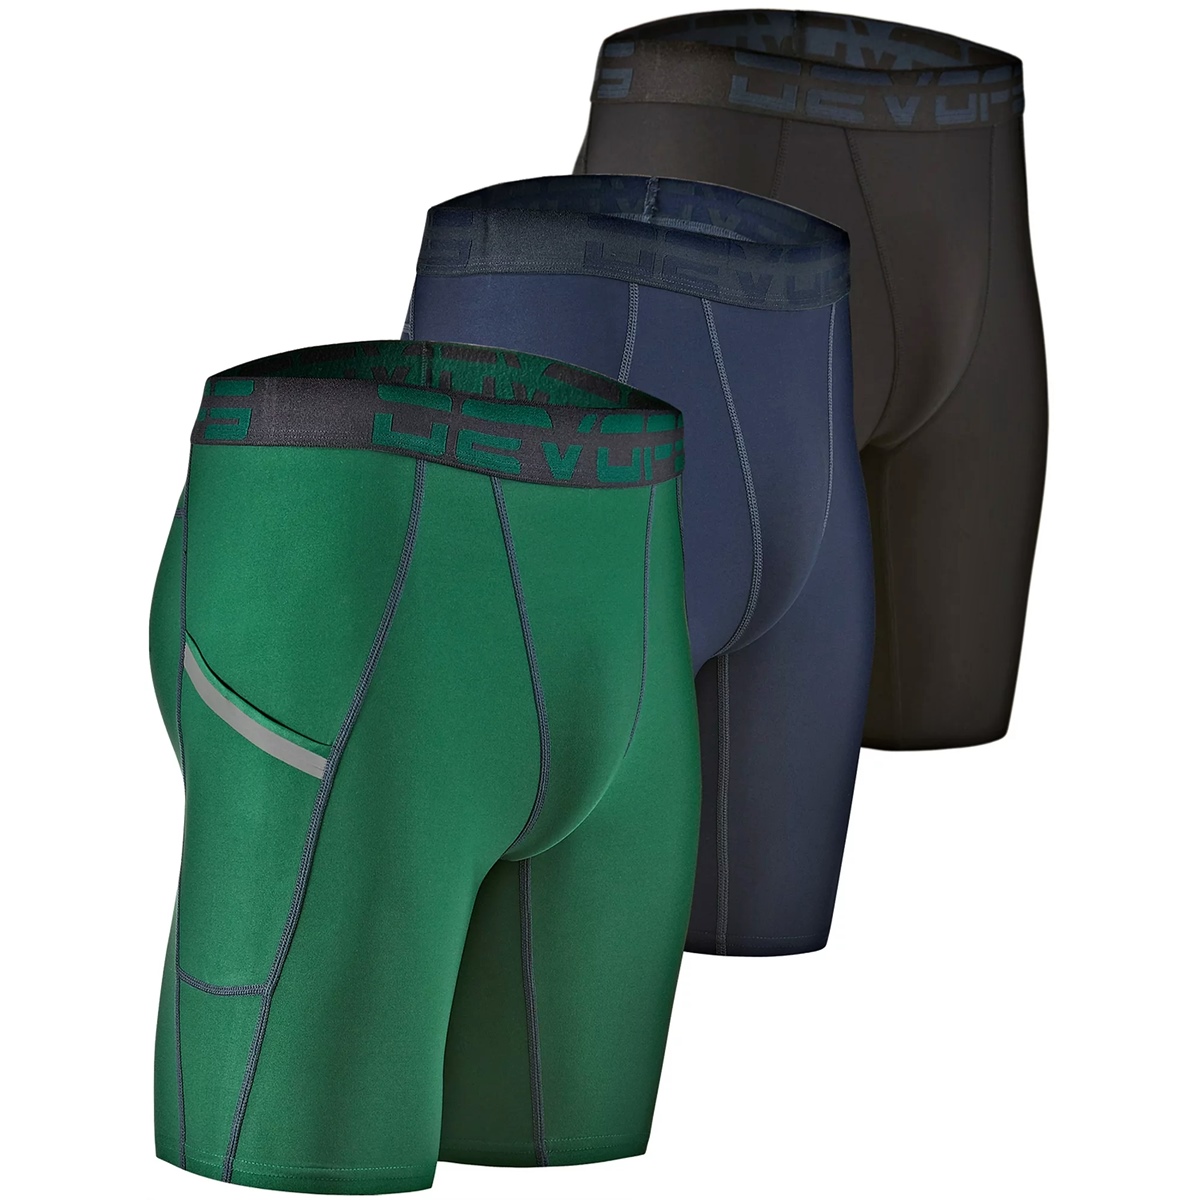 8 Incredible Men’s Compression Shorts Packs For 2023